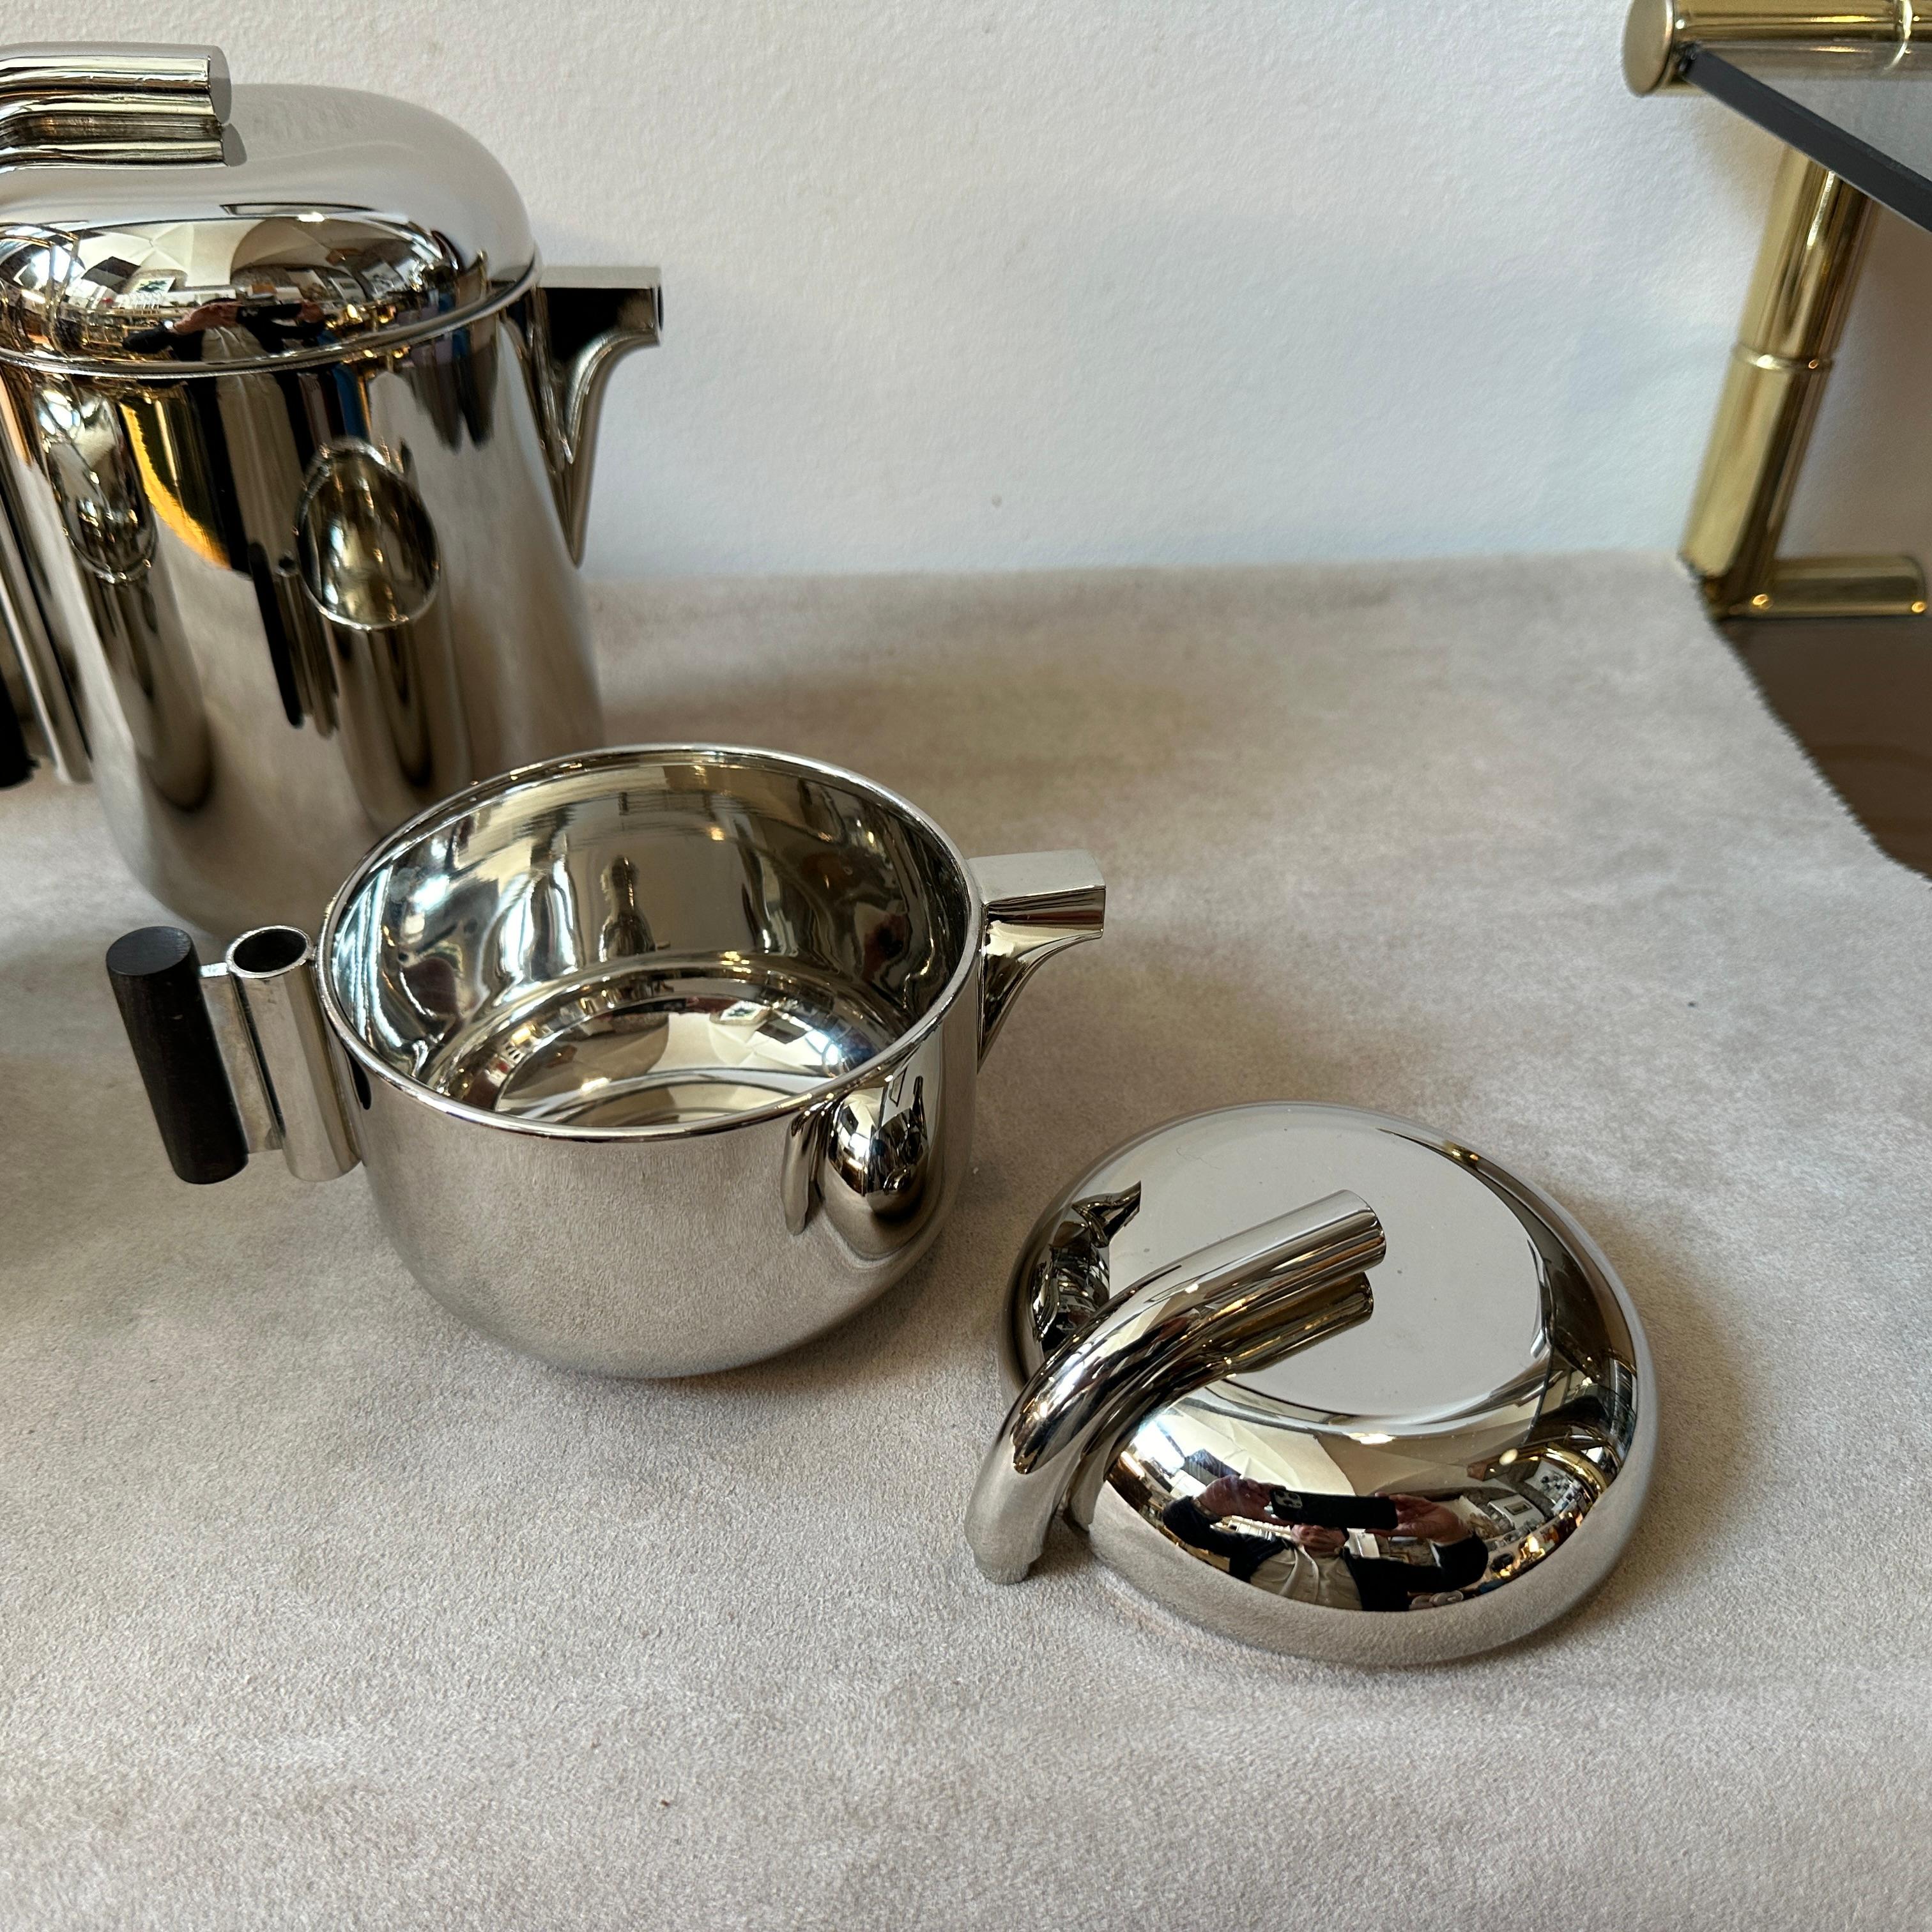 1960s Silver Plated Tea and Coffee Set Designed by G. Coarezza for Mam Milano For Sale 7